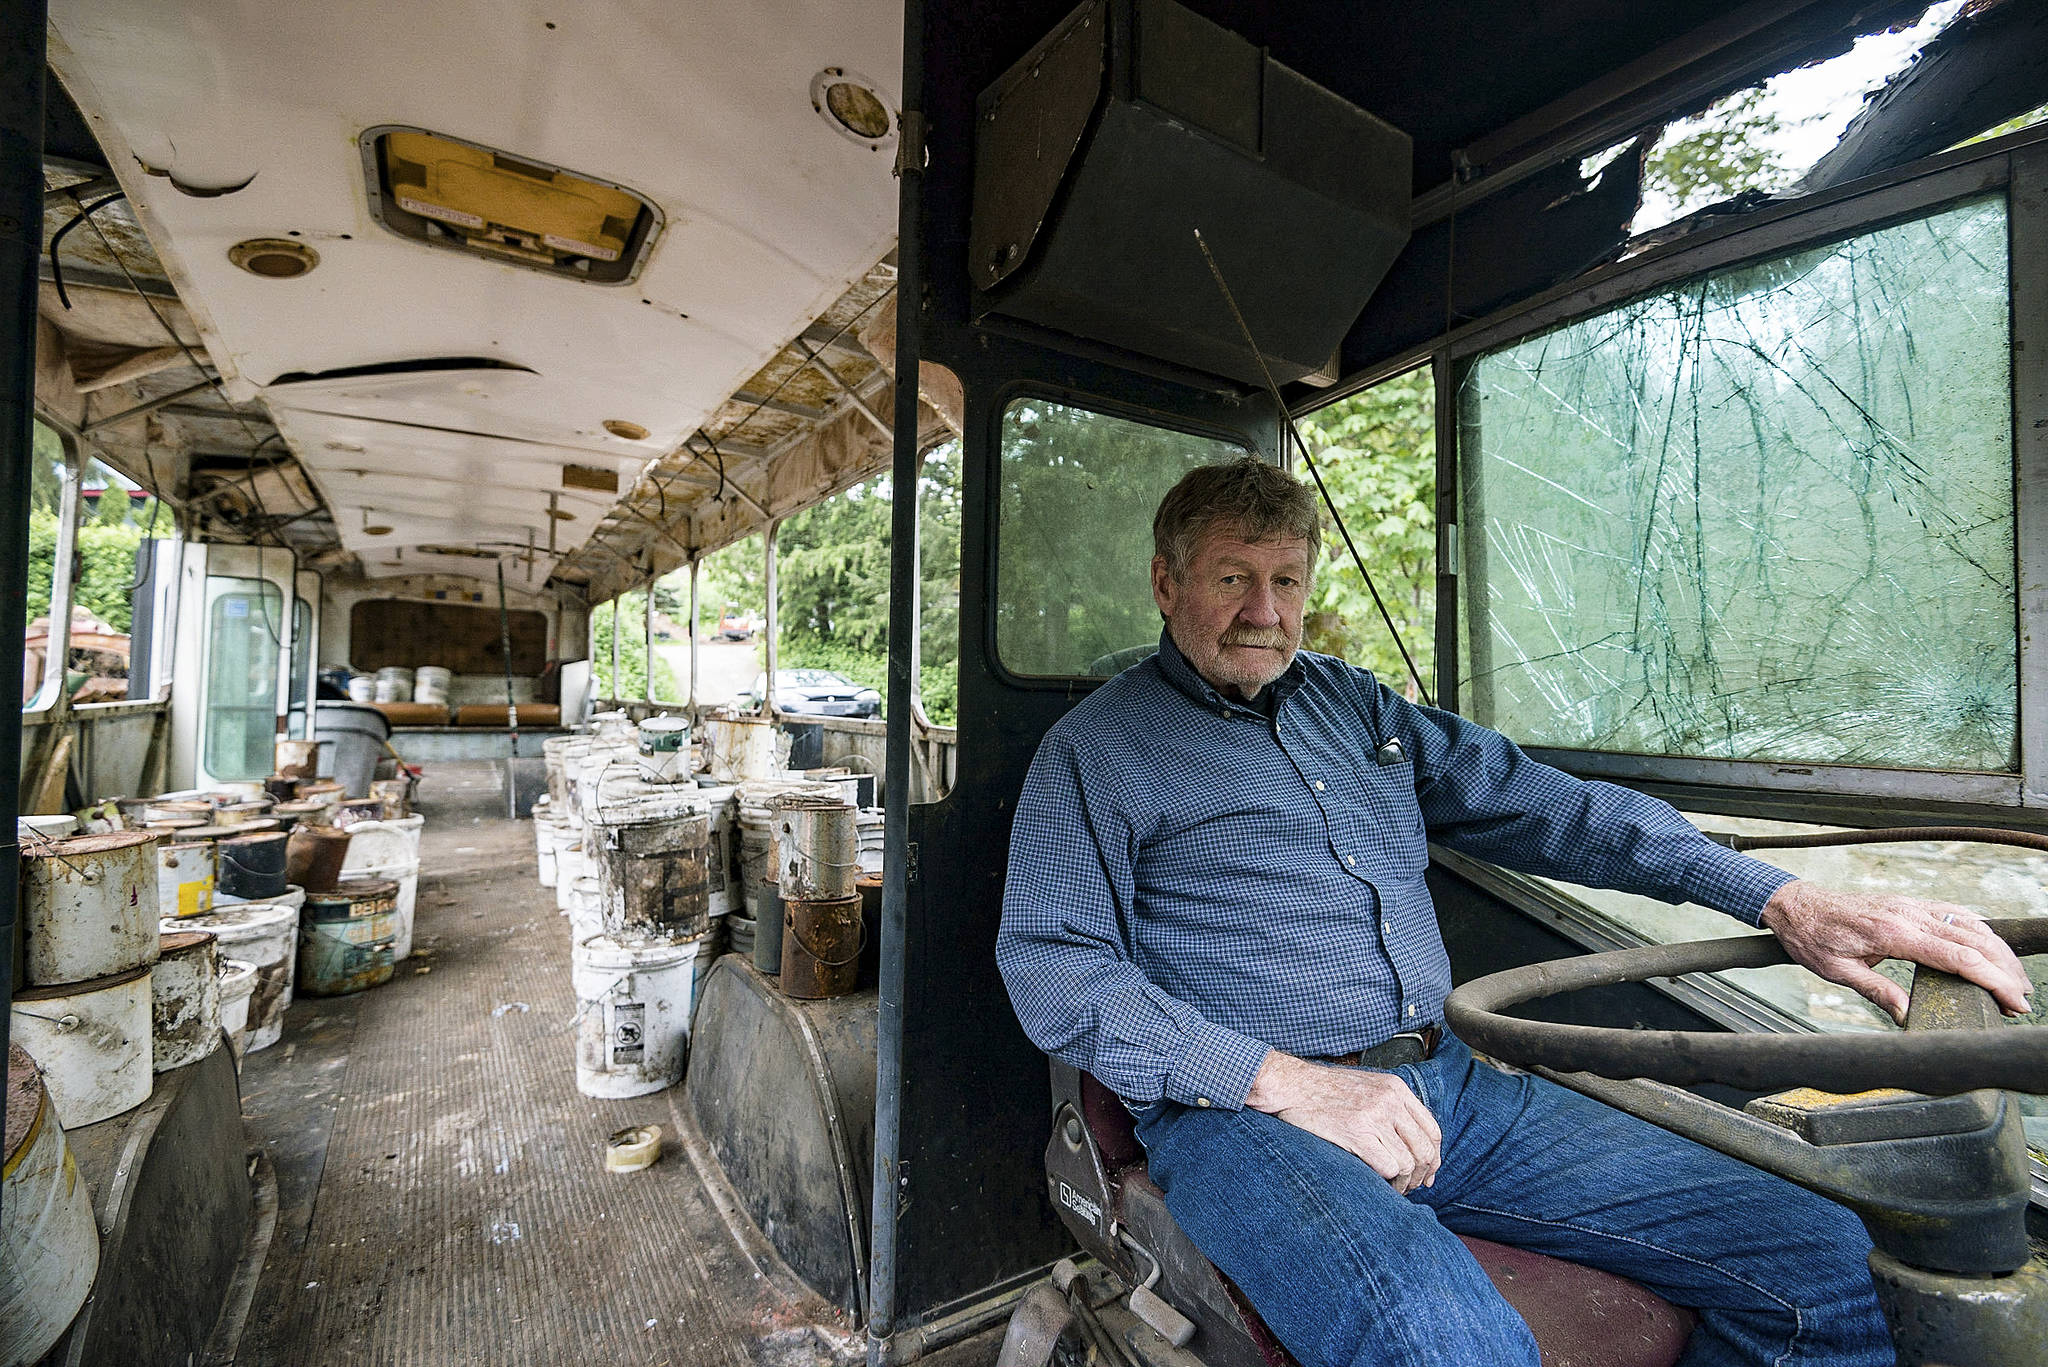 Charles Pillon sits inside one of the several buses on Iron Mountain. Photo by Caean Couto                                &lt;em&gt;Photo originally published &lt;a href="http://www.rentonreporter.com/news/the-last-days-of-iron-mountain/" target="_blank"&gt;here&lt;/a&gt;&lt;/em&gt;